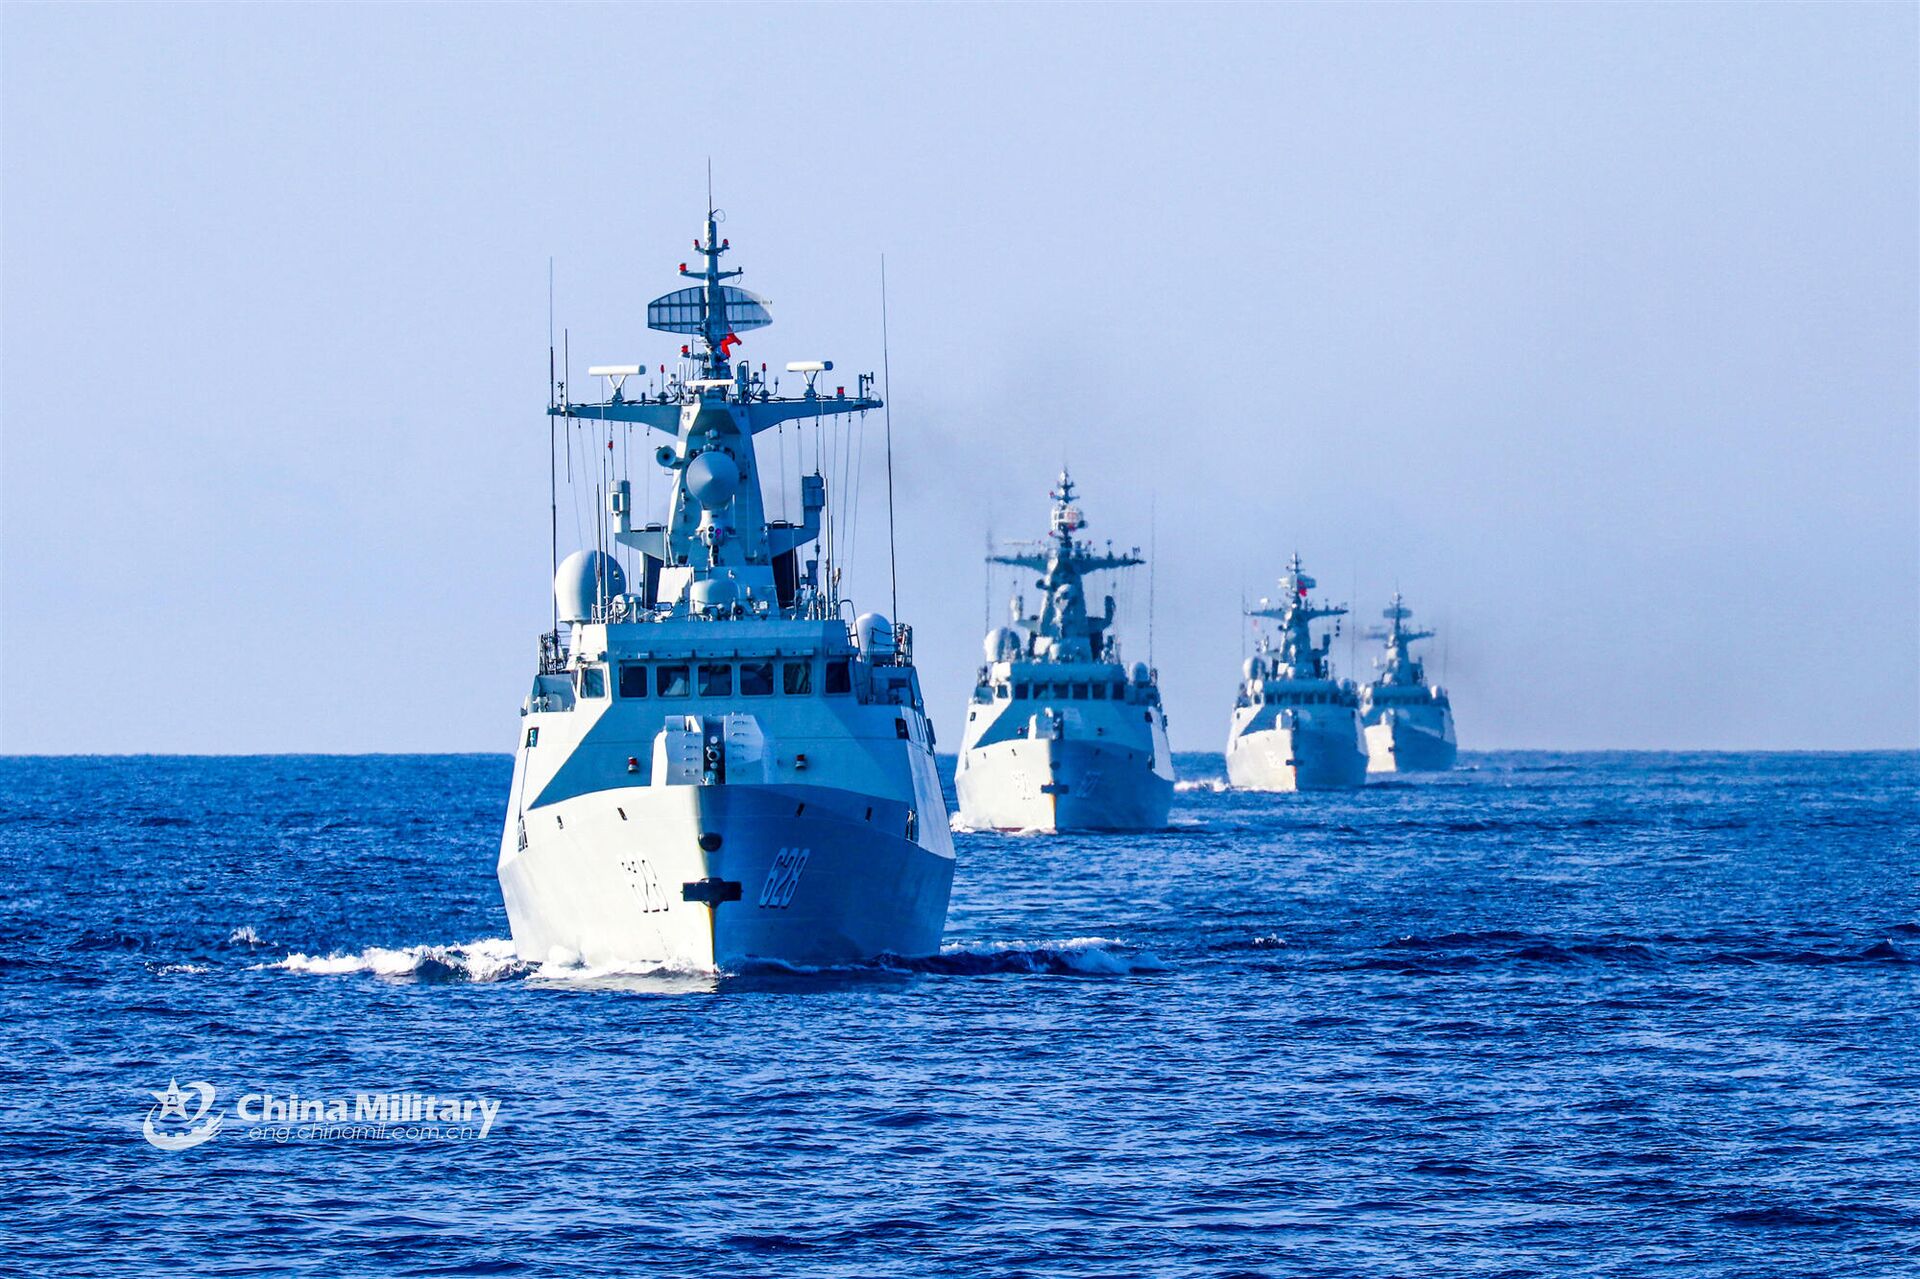 The frigate Enshi (Hull 627), Yongzhou (Hull 628), Bazhong (Hull 625), and Wuzhou (Hull 626) steam in formation during a 9-day maritime training exercise in waters of the South China Sea in late November, 2020. They are attached to a frigate flotilla of the navy under the PLA Southern Theater Command. - Sputnik International, 1920, 10.11.2021